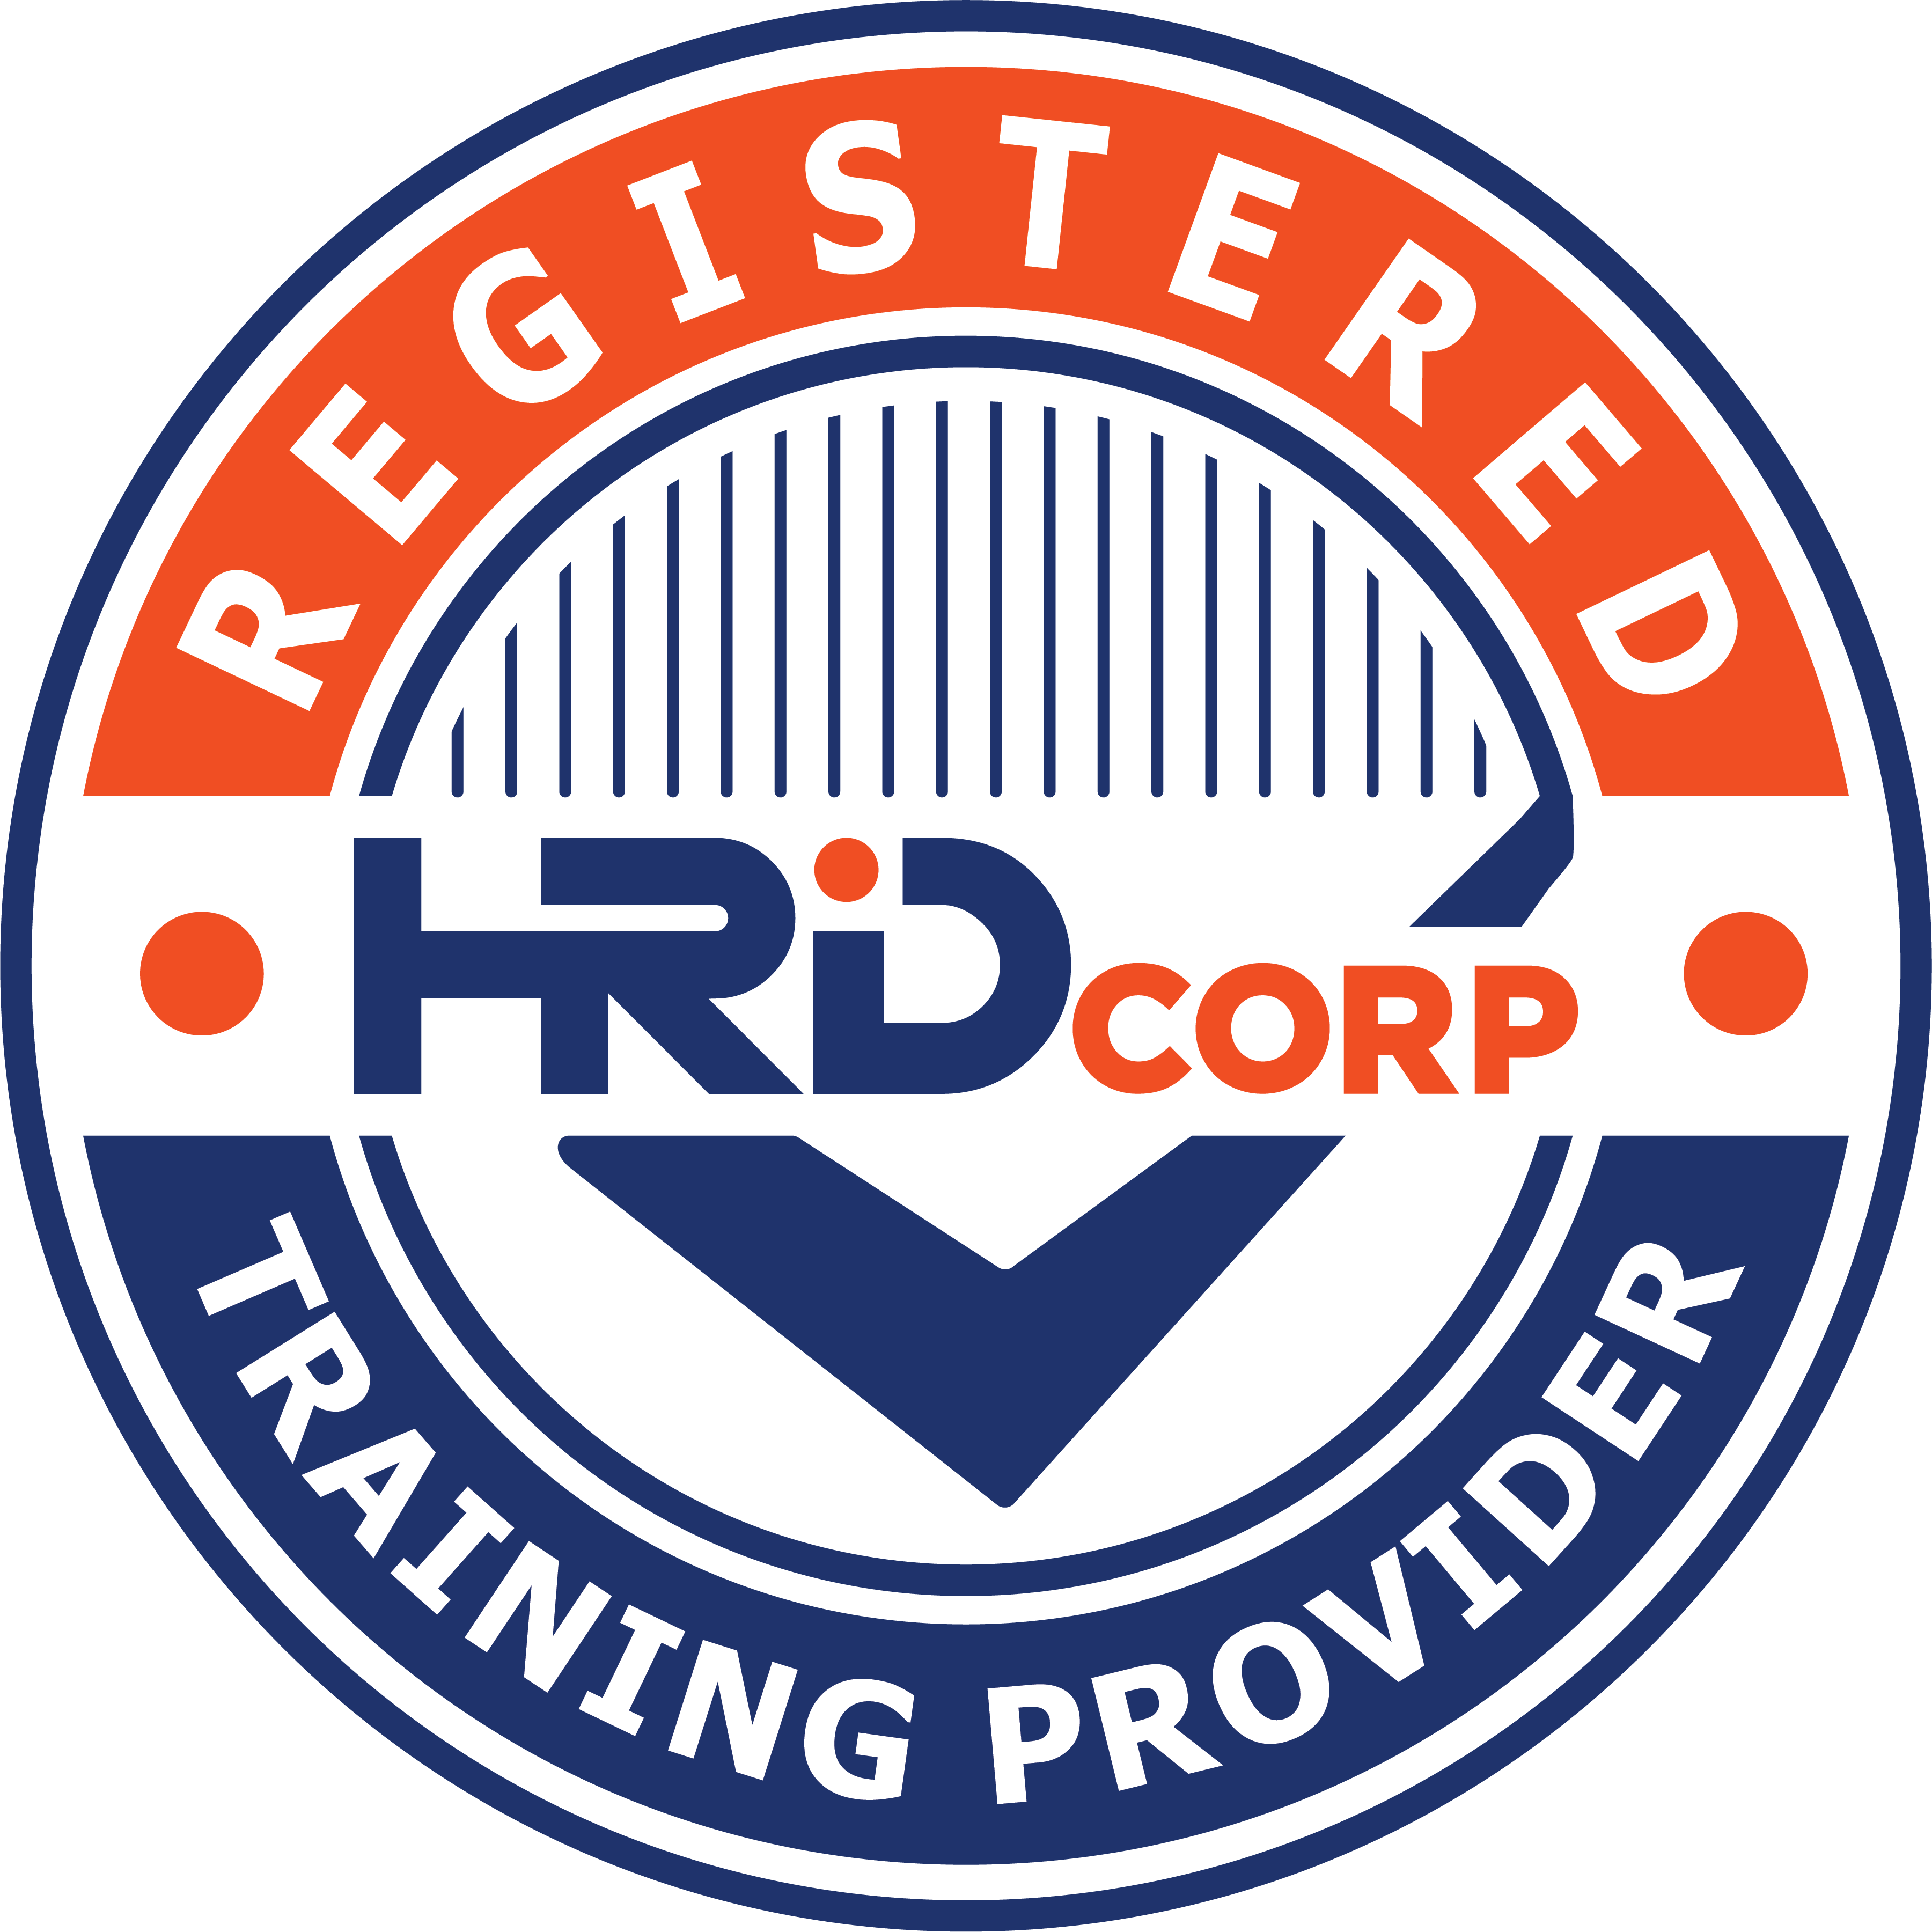 Logo_Training_Provider_Logo_Registered_Training_Provider WORLDWIDE-WIFI-EXPERTS is an approved company for HRD Corp claimable Wi-Fi training - World Wide WiFi Experts